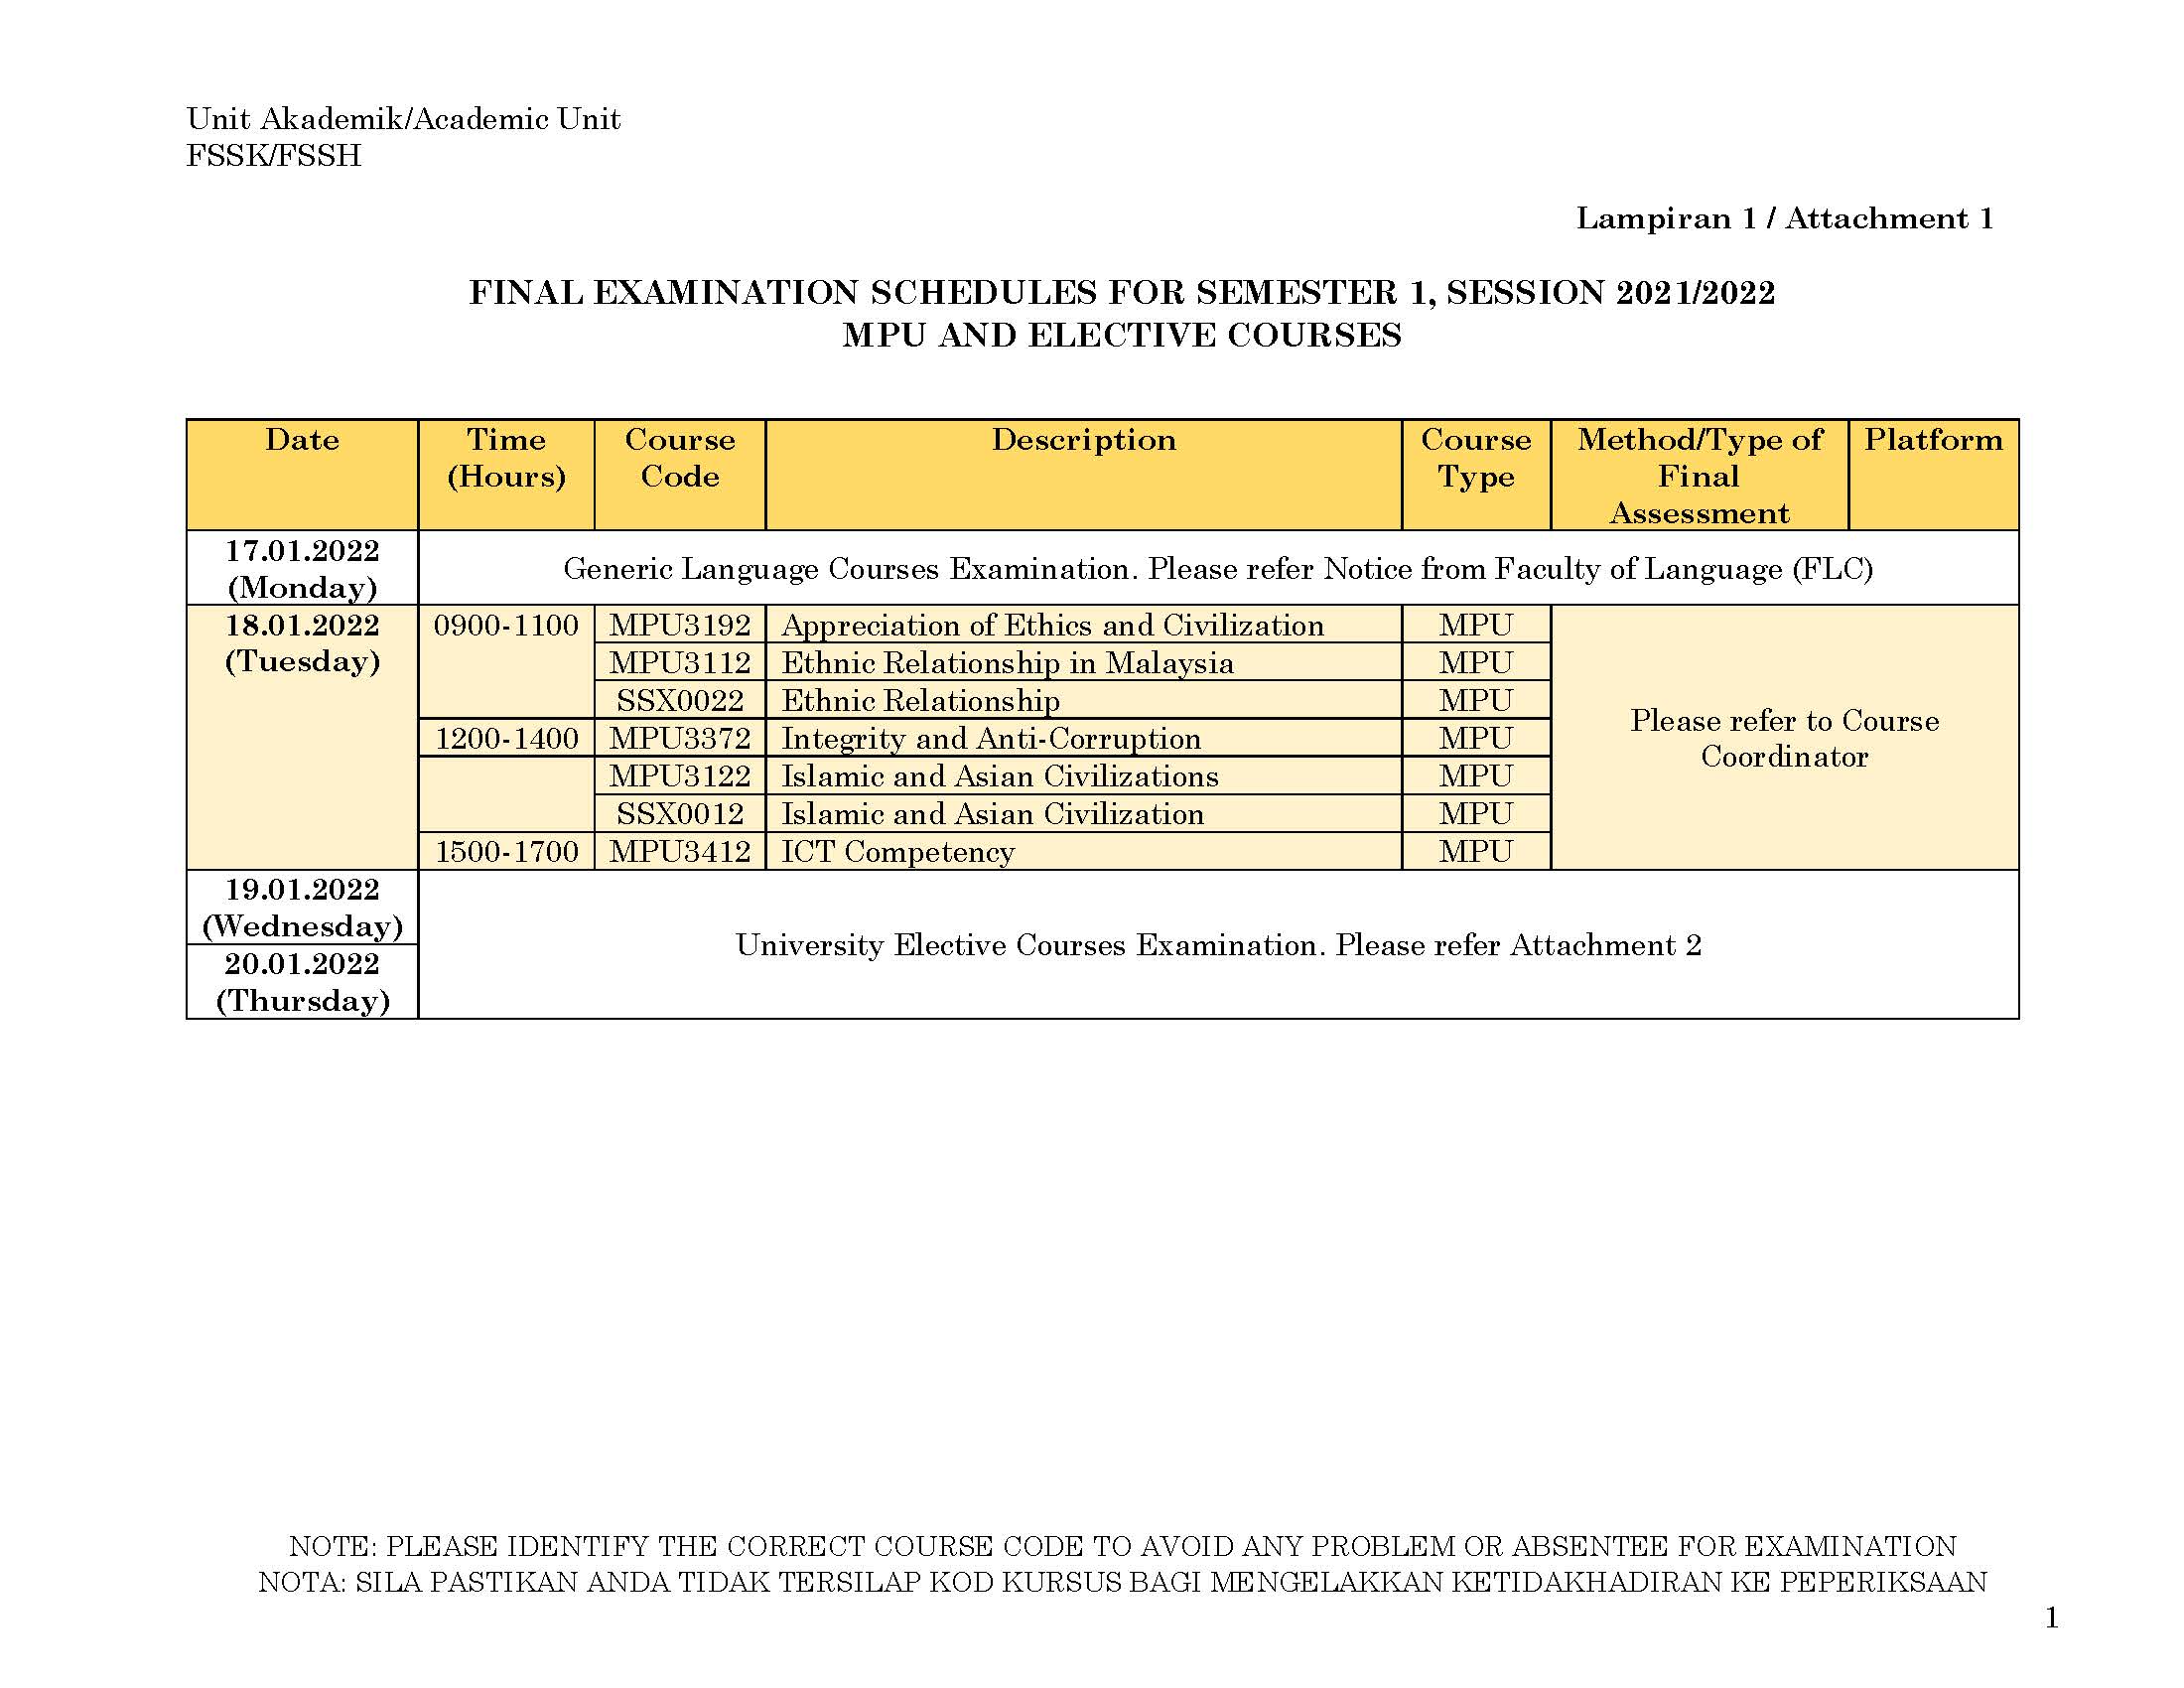 Page 2 UPDATE FINAL EXAMINATION SCHEDULES FOR SEMESTER 1 SESSION 2021 2022 2